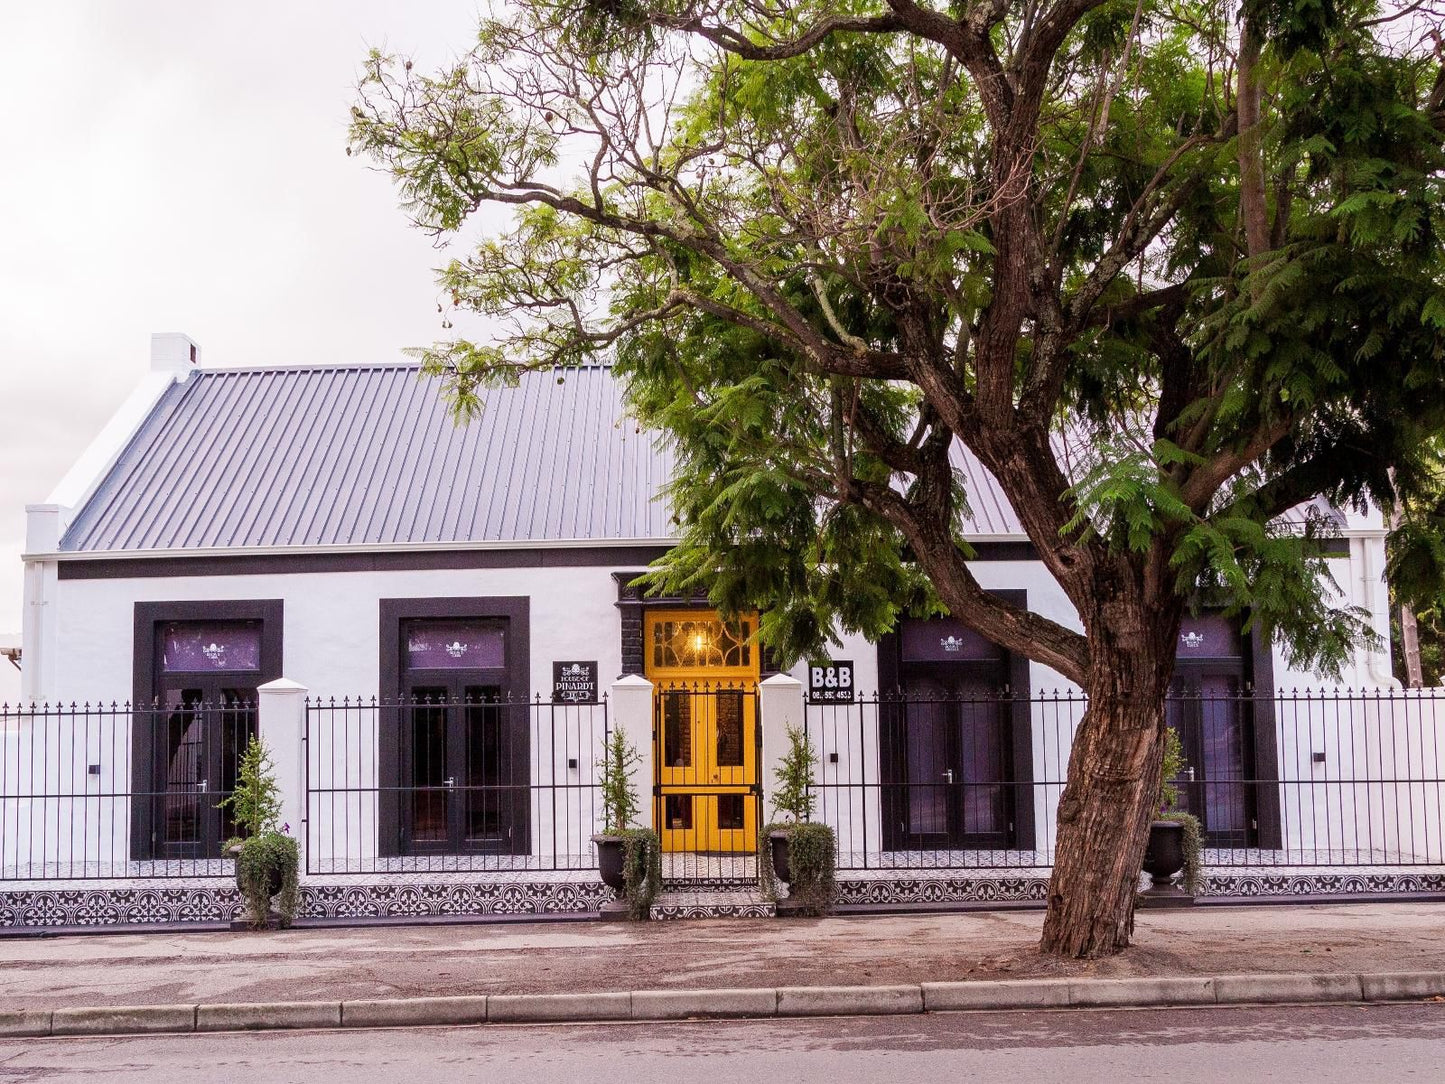 House Of Pinardt Robertson Western Cape South Africa House, Building, Architecture, Bar